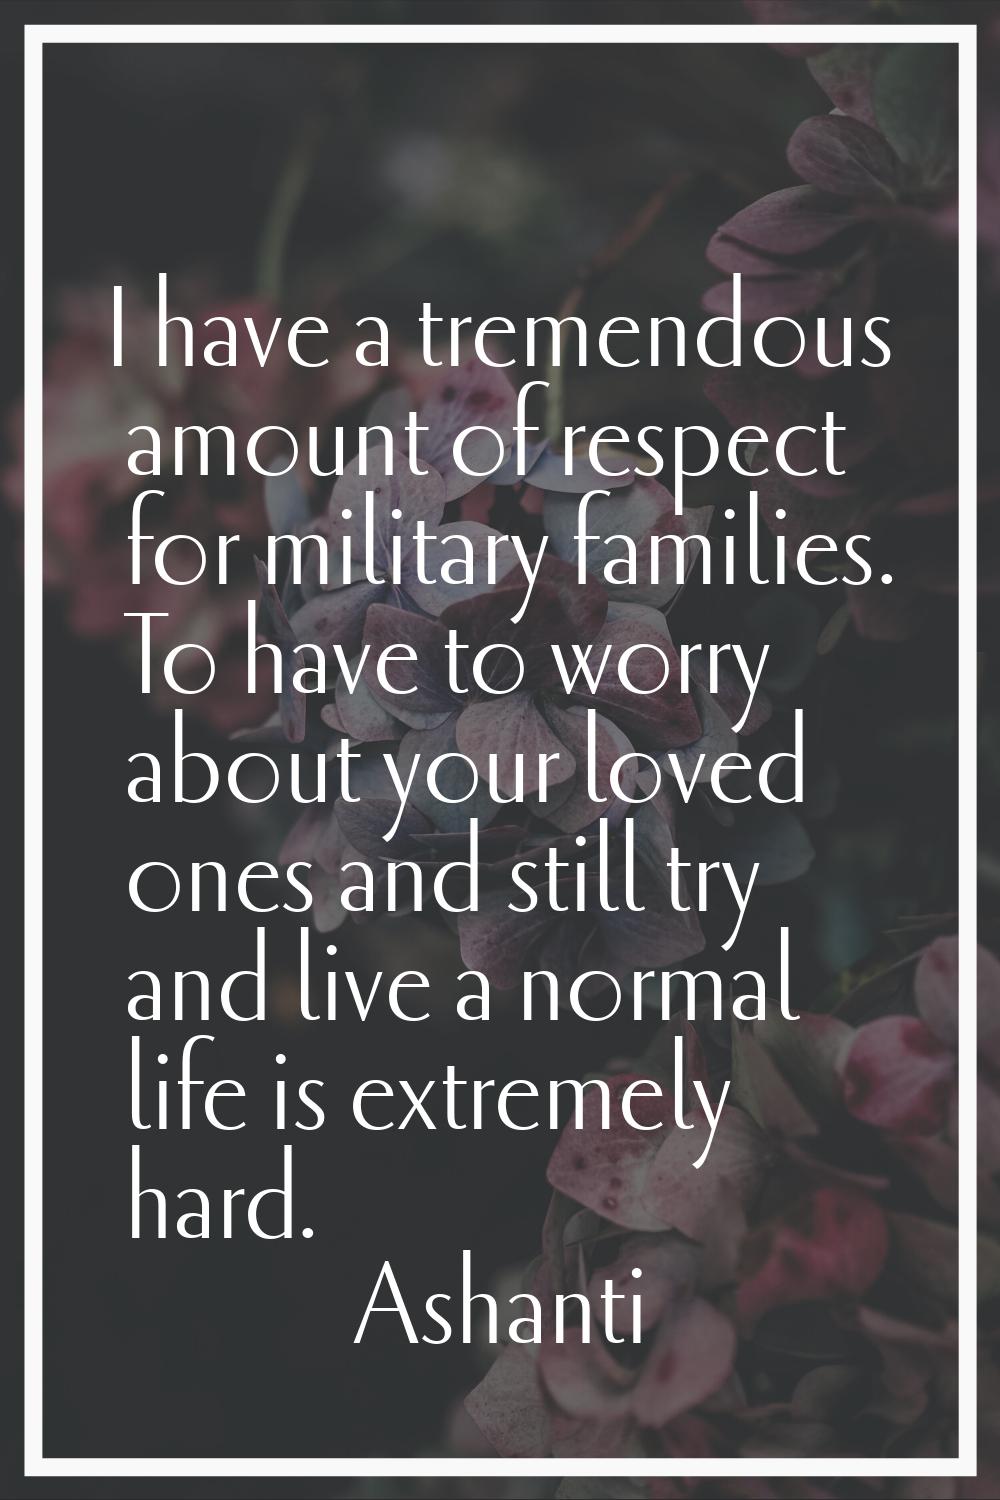 I have a tremendous amount of respect for military families. To have to worry about your loved ones